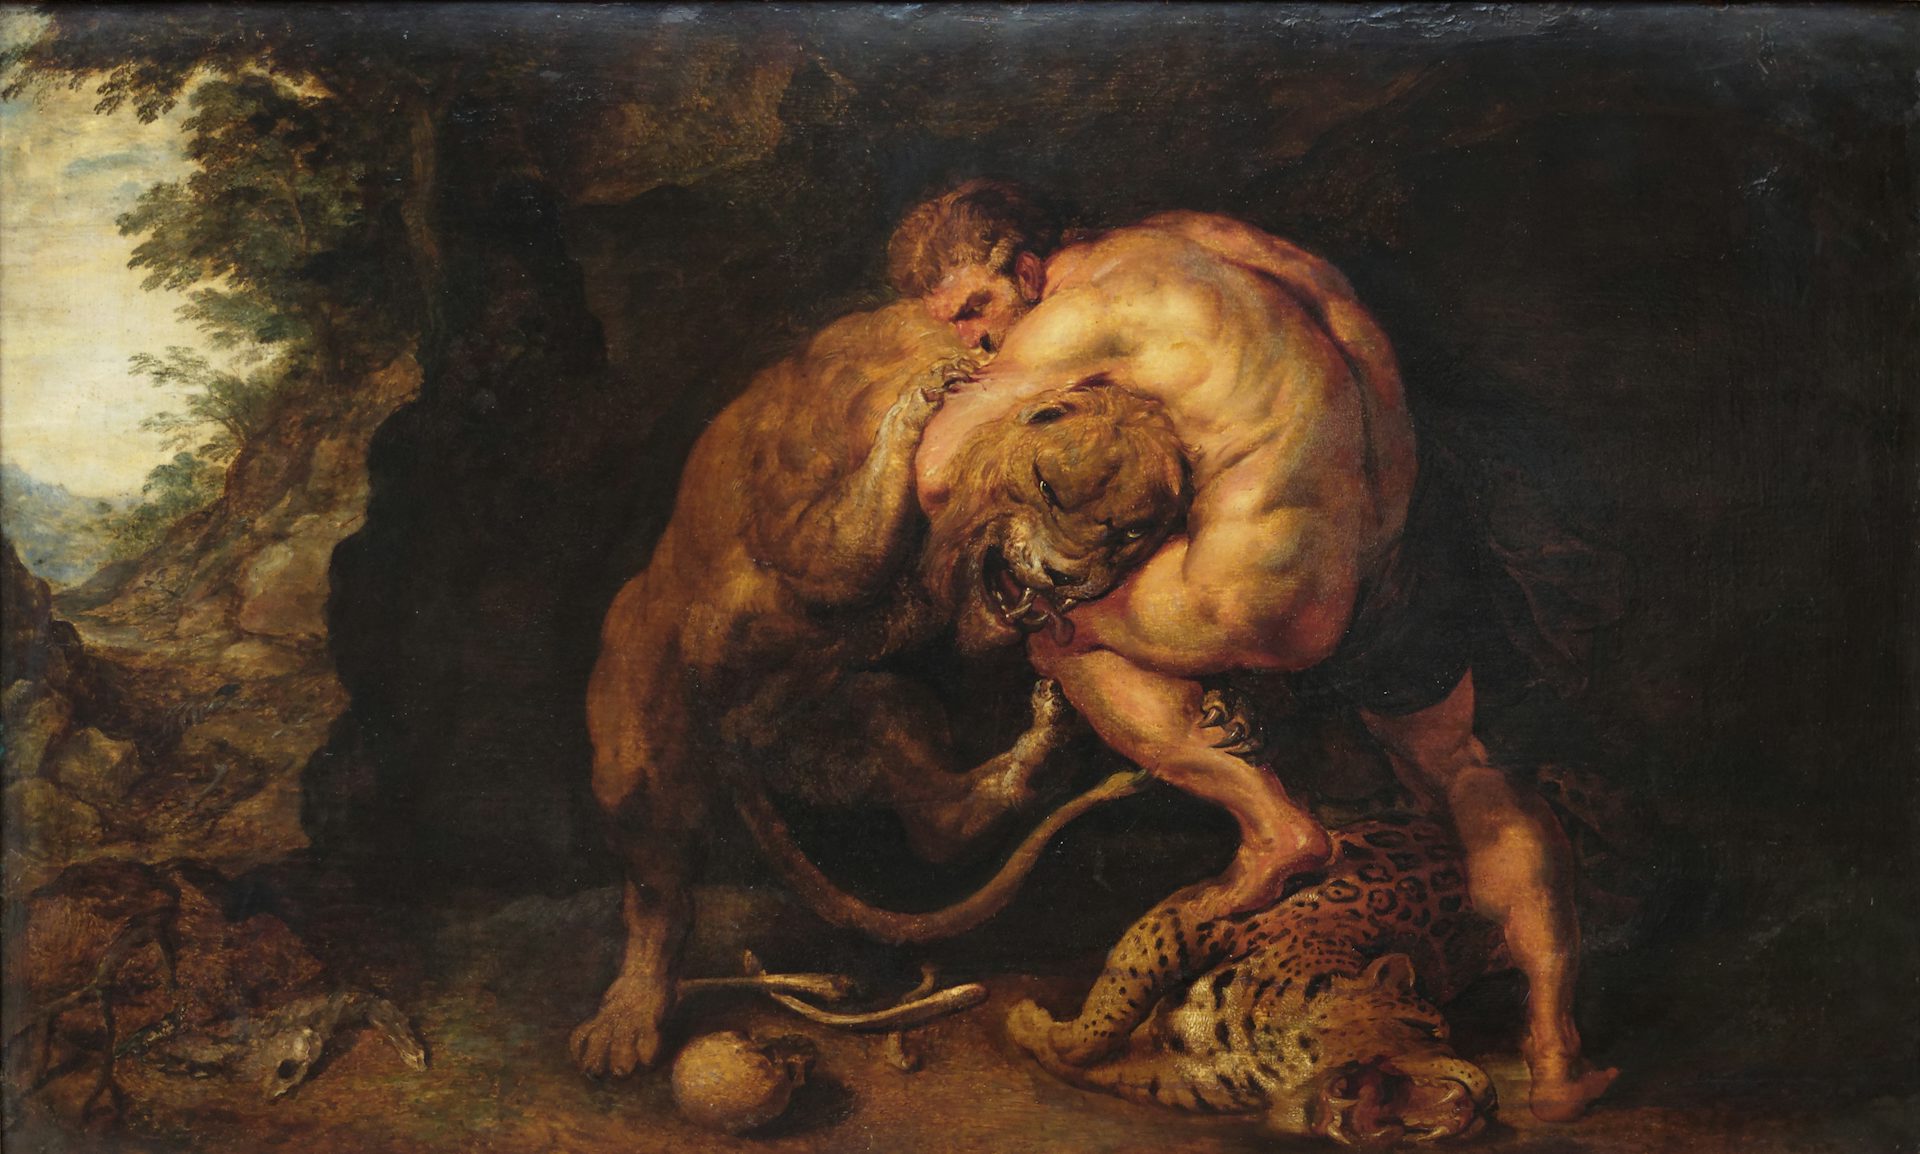 Hercules and the Nemean Lion by Peter Paul Rubens